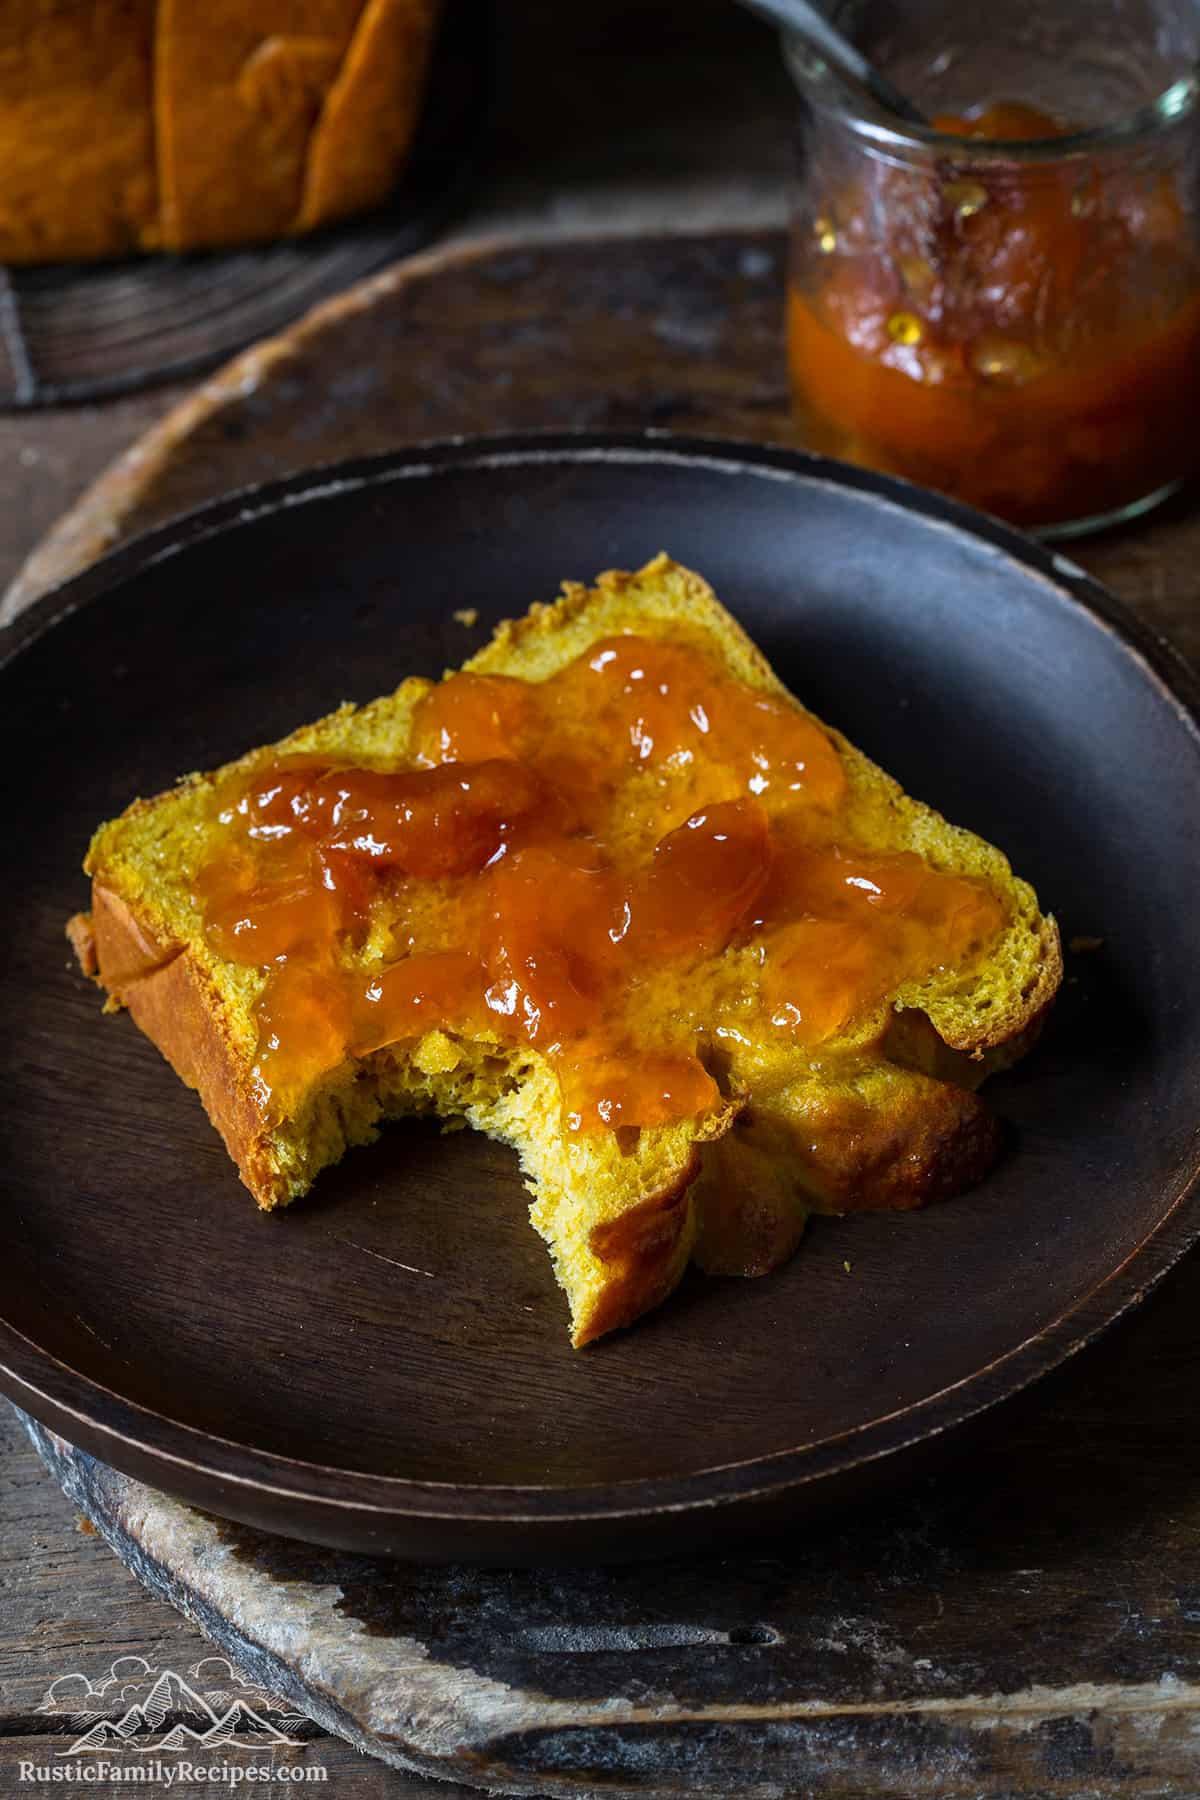 A slice of pumpkin brioche slathered with jam with a big bite missing.